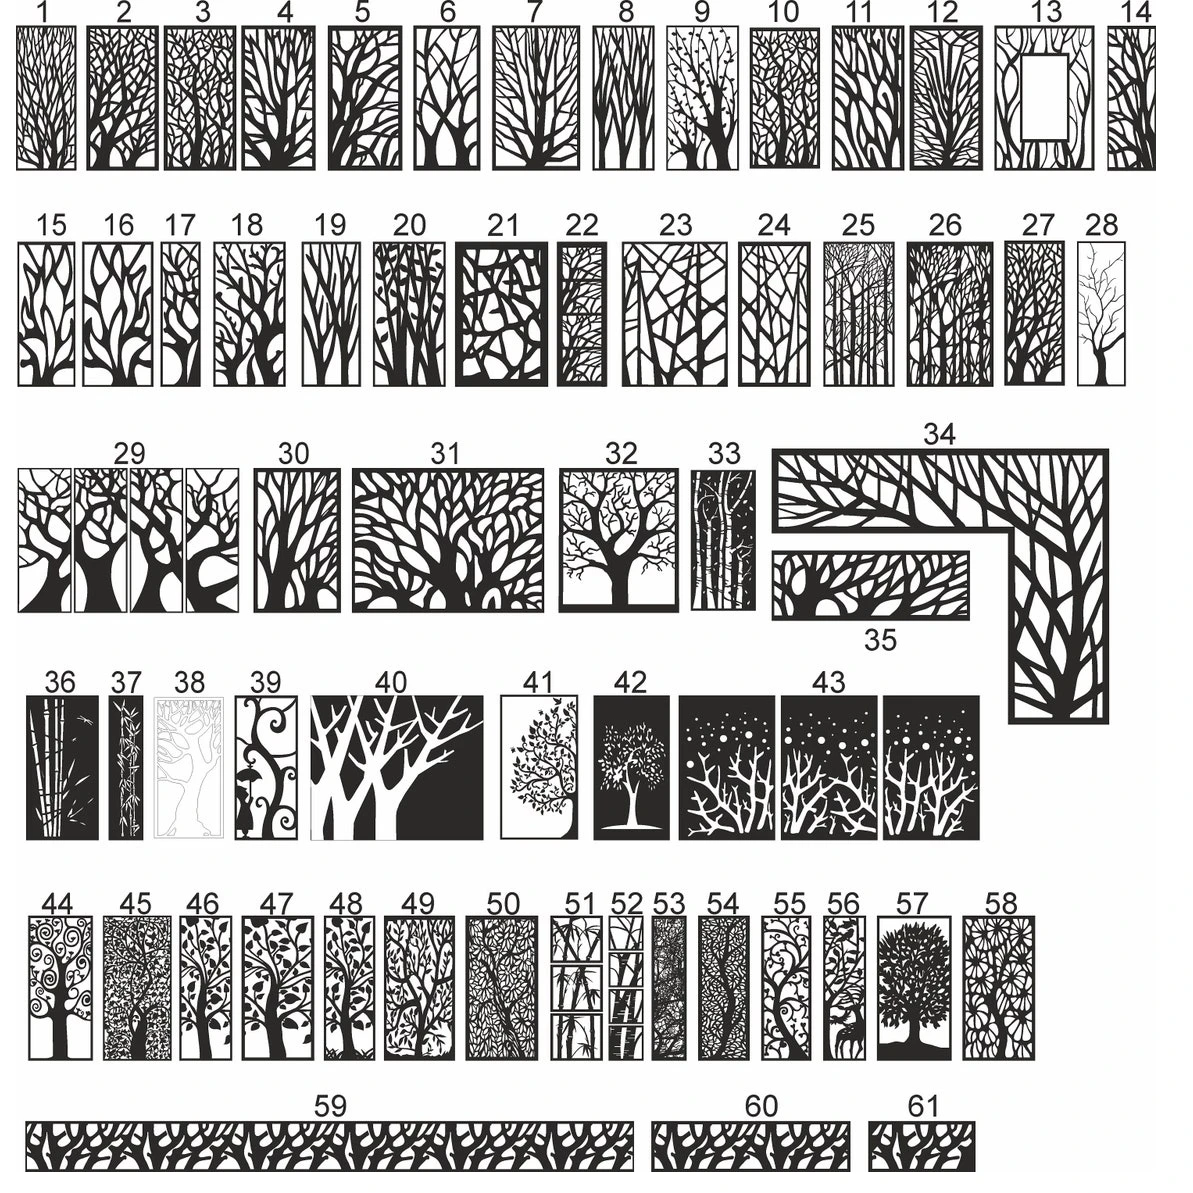 Trees Panels Collection Wall Décor Design Templates DXF, SVG, EPS, CDR Files for Laser/Plasma Cutting and Printing butcher block woodworking bench